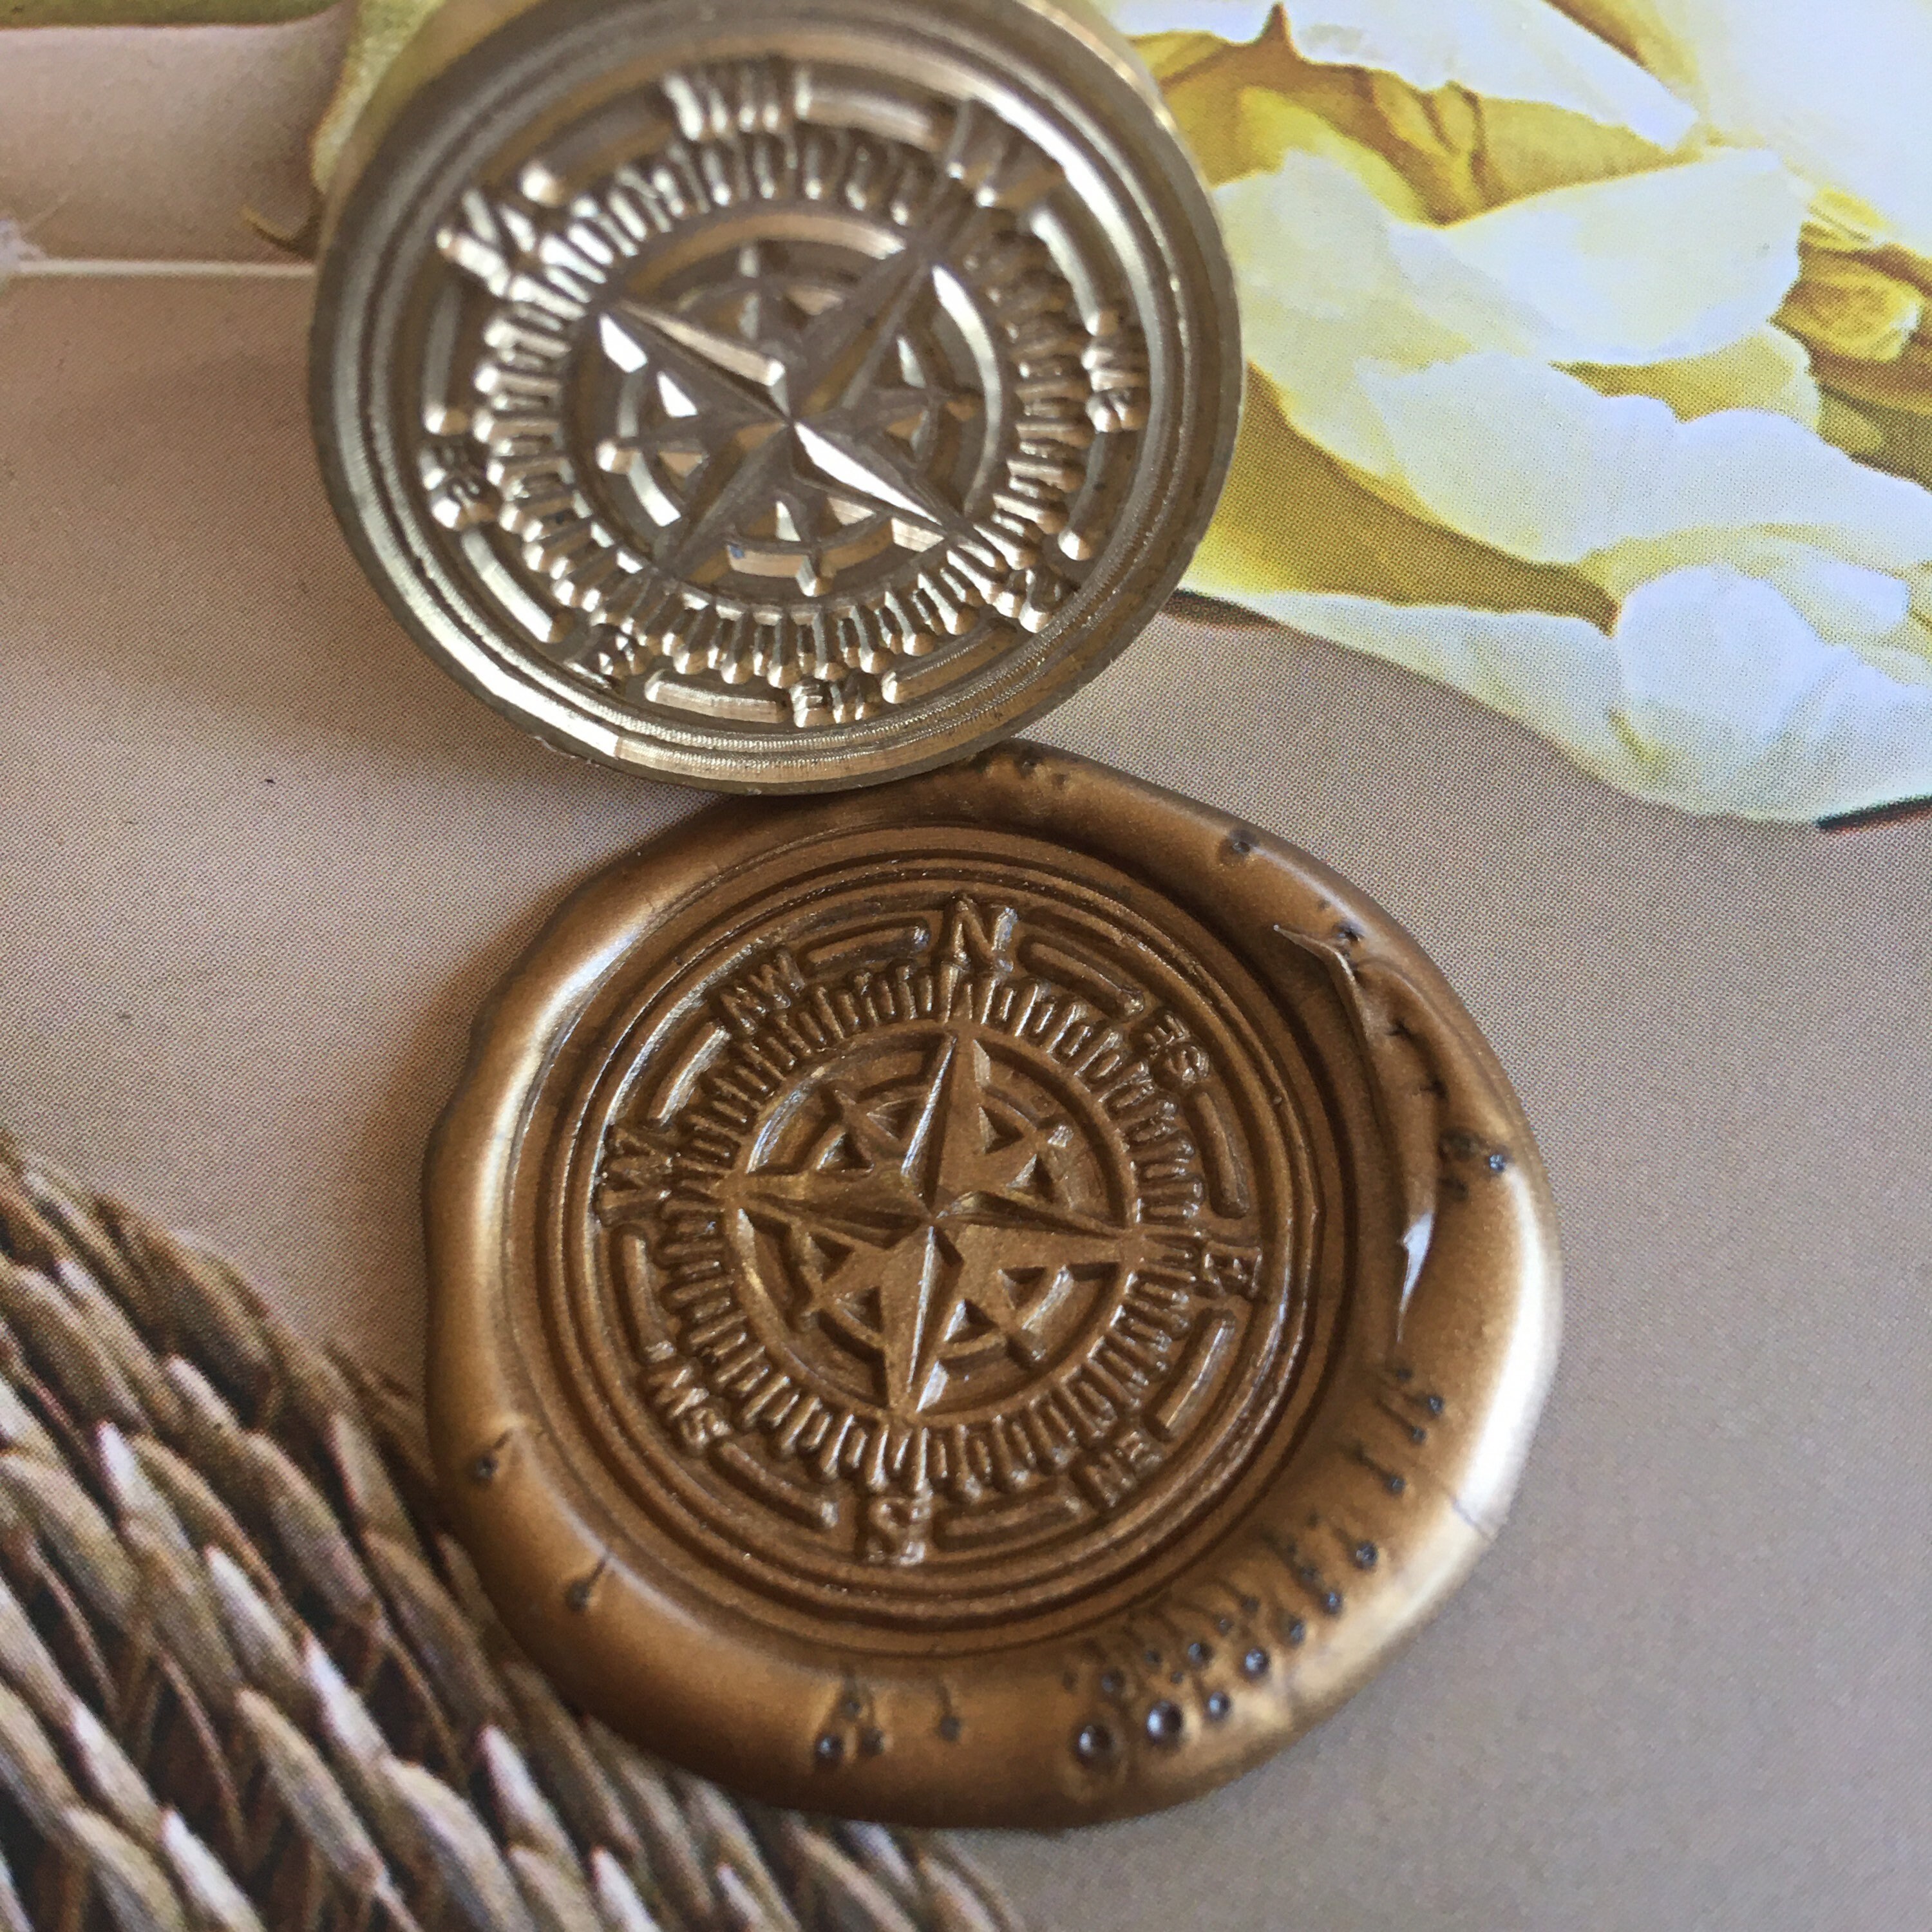 1pc Wax Seal Stamp Head Compass Sealing Brass Stamp Head Olny